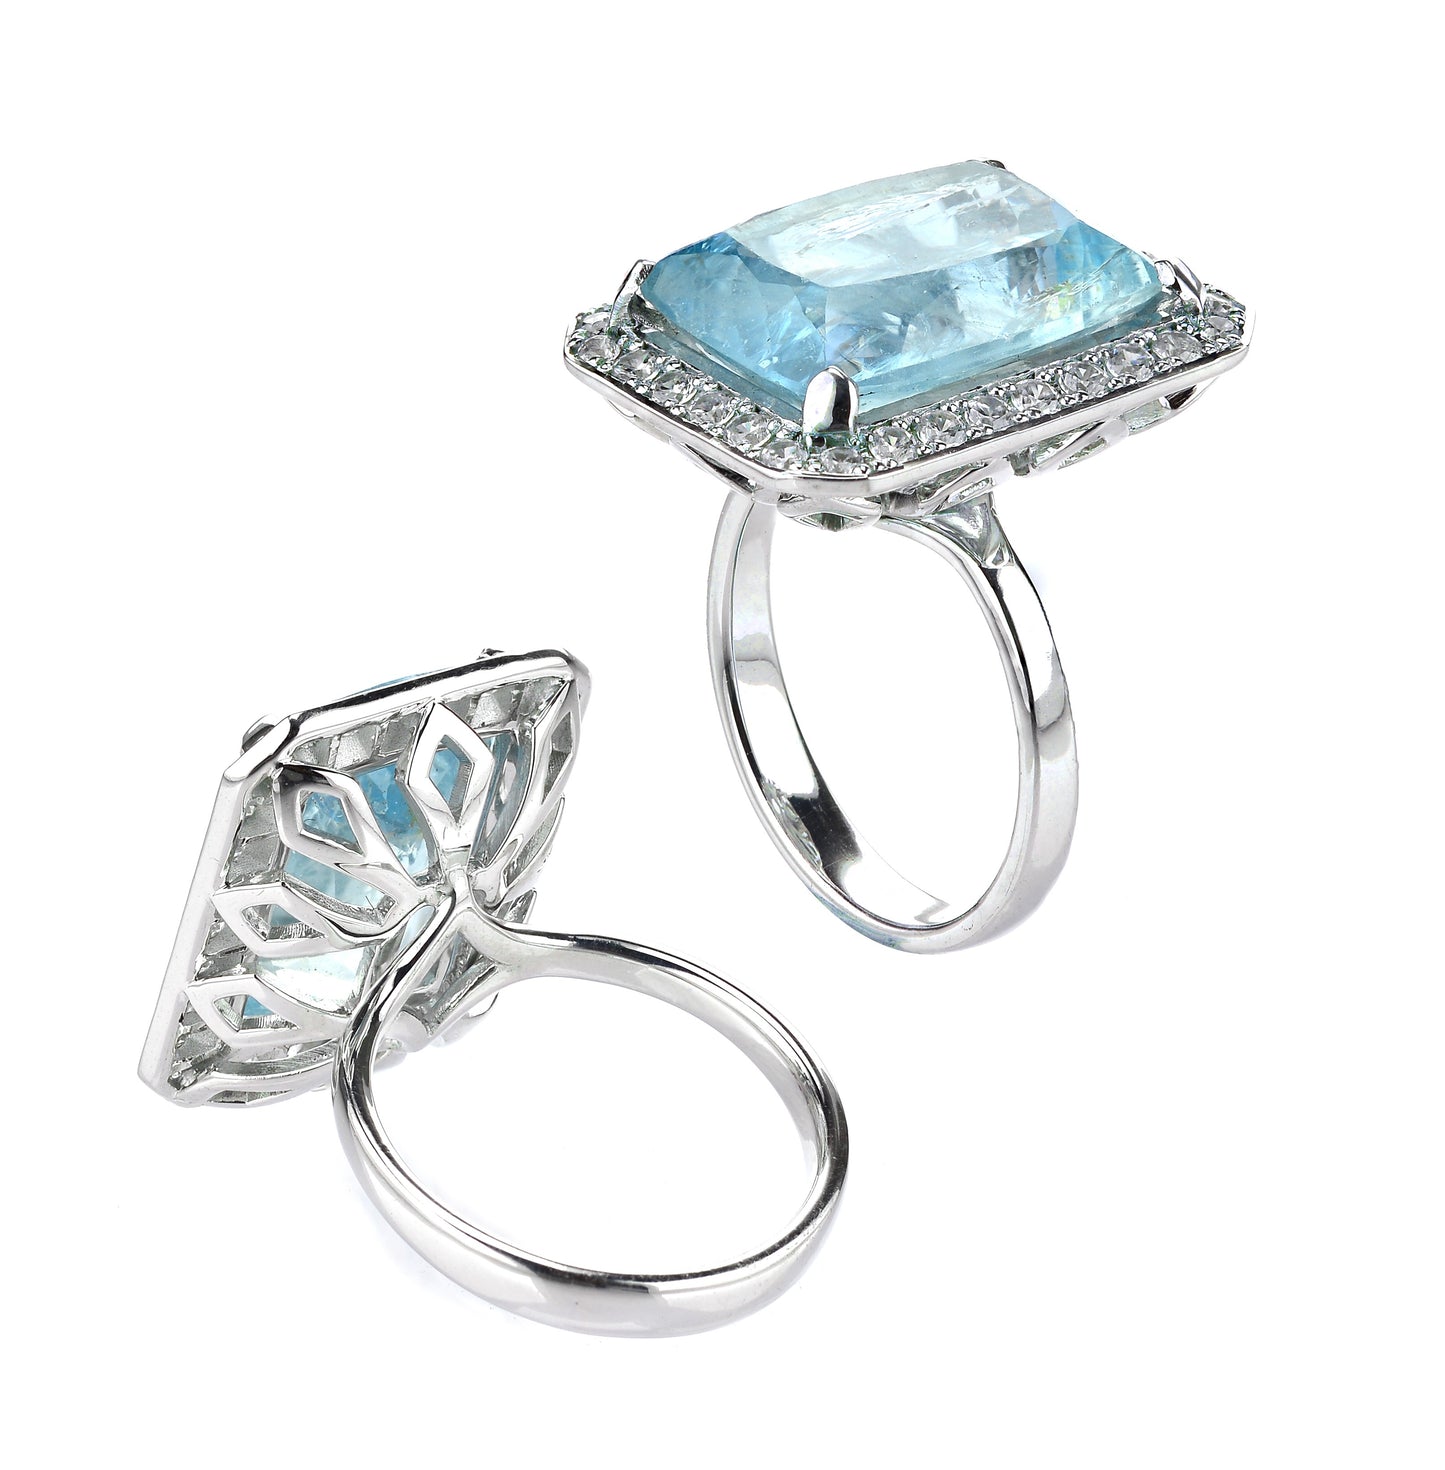 Stand out & Shine - Aquamarine Ring